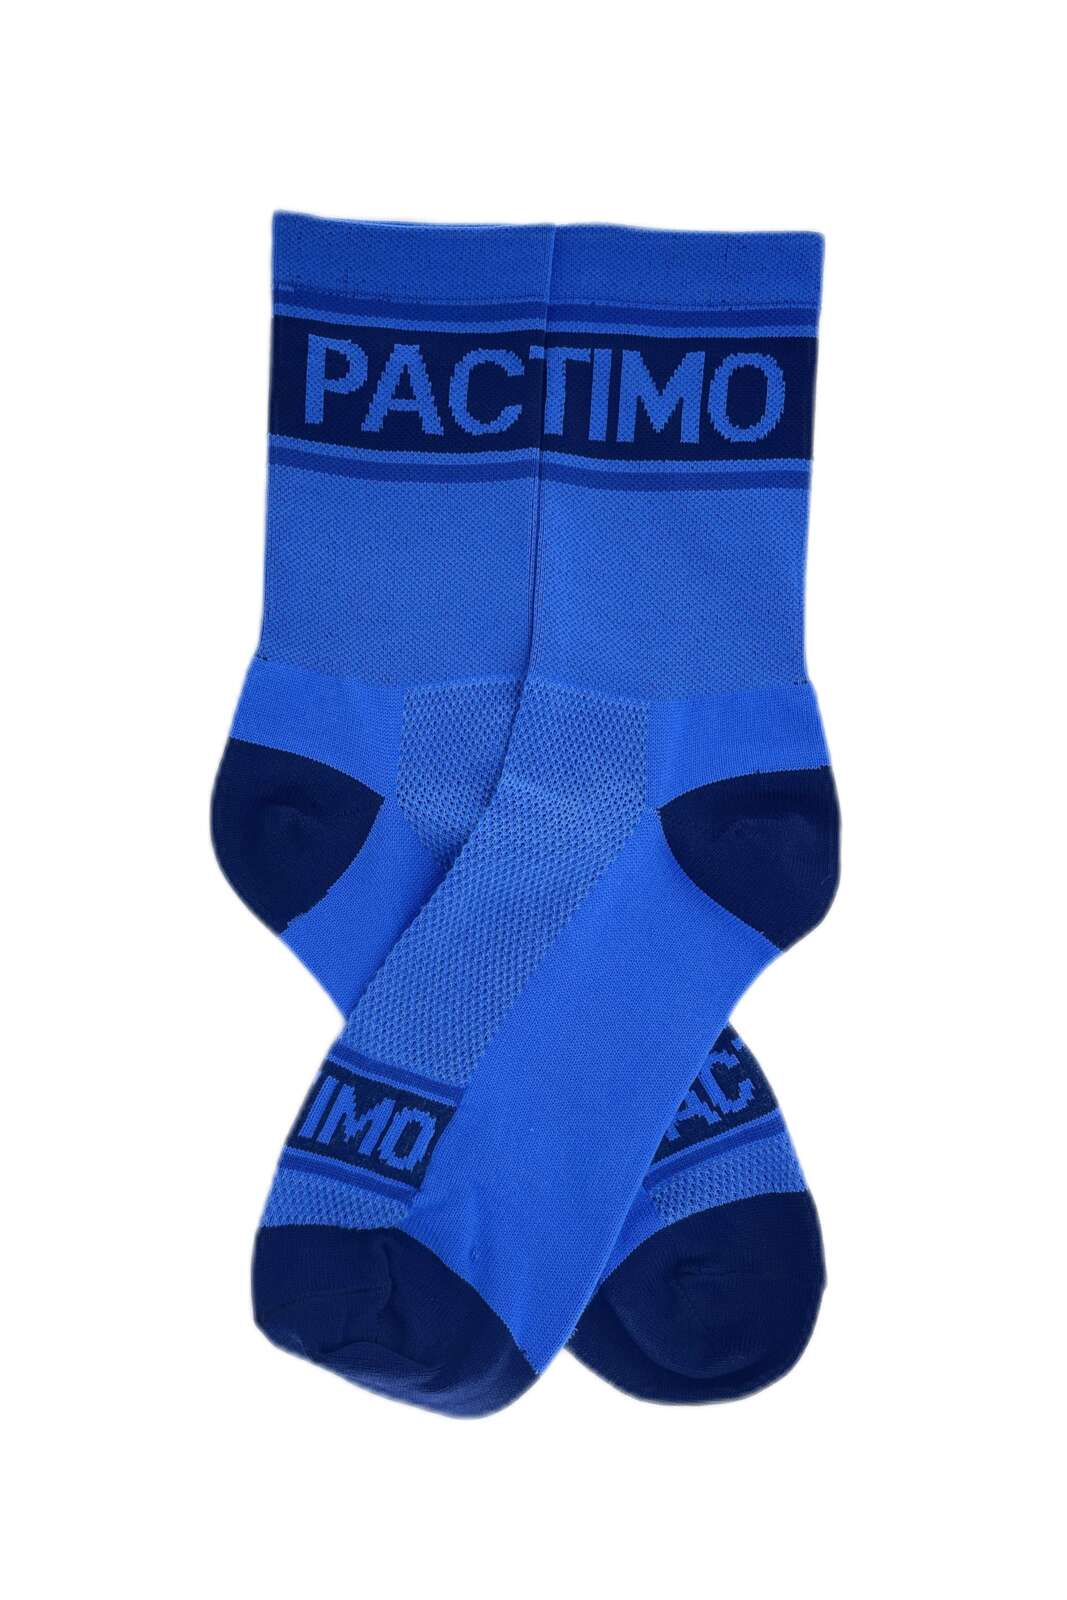 Blue Cycling Socks - Ascent Side by Side